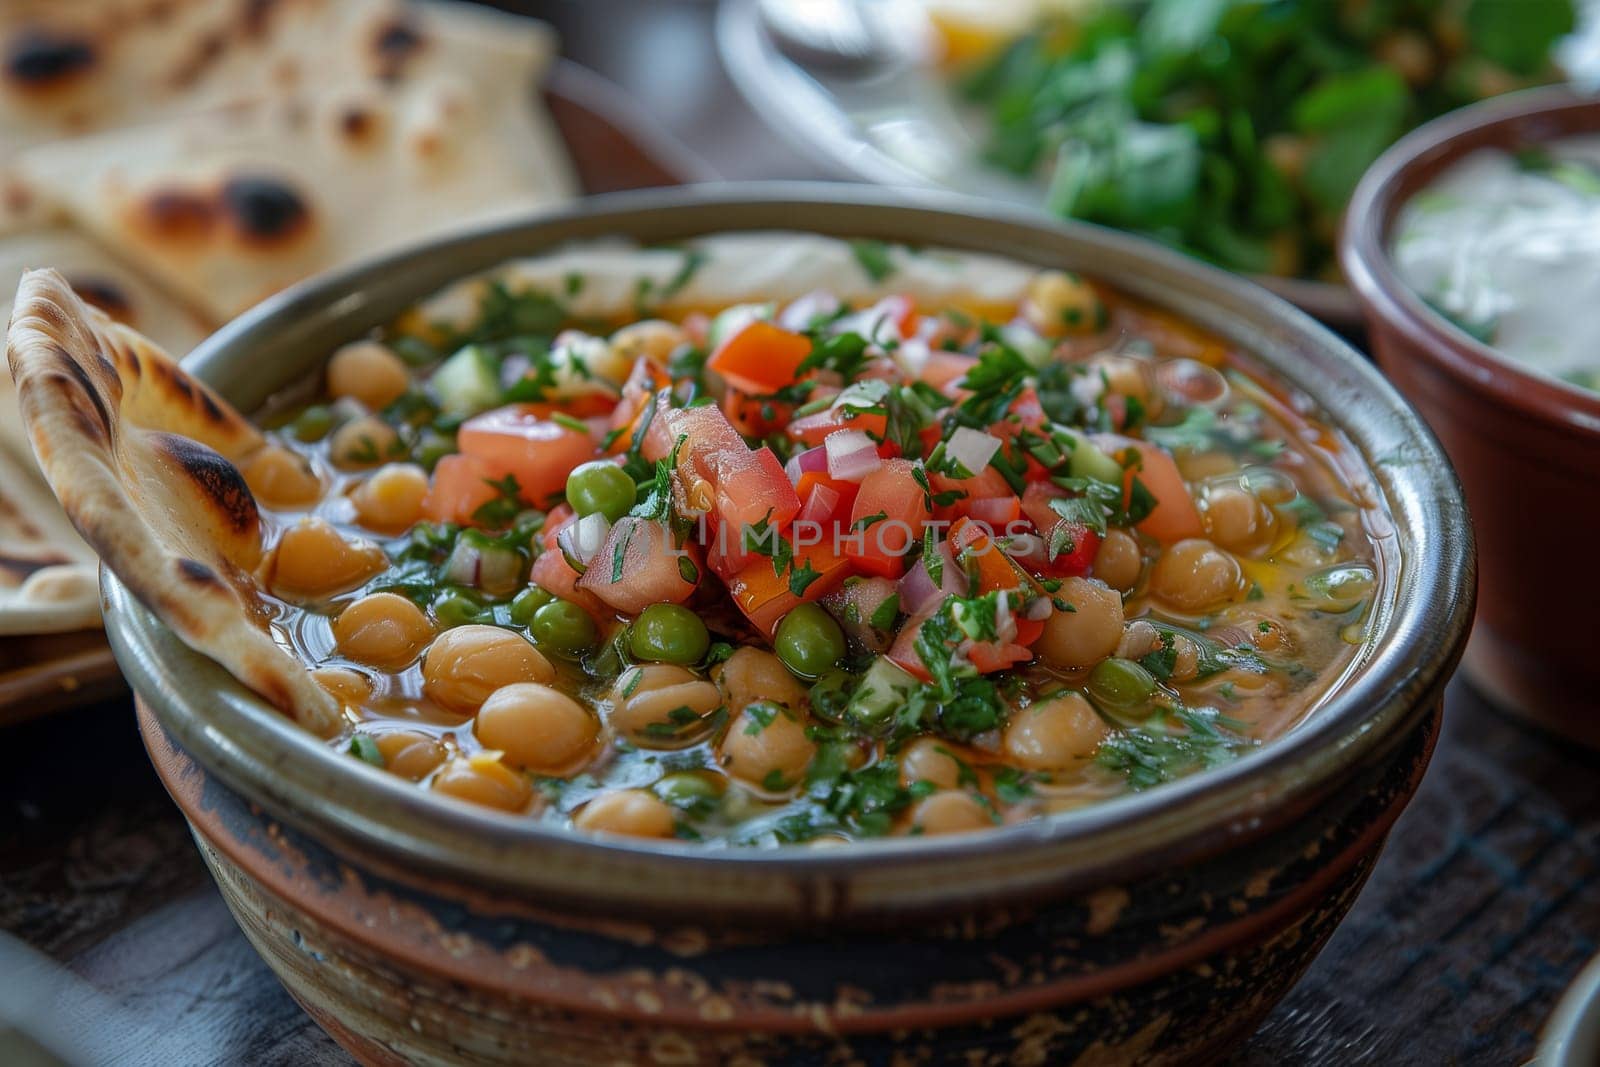 A bowl filled with Israeli sabich soup, topped with pita, eggplant, and chickpeas, with a silver spoon inside.